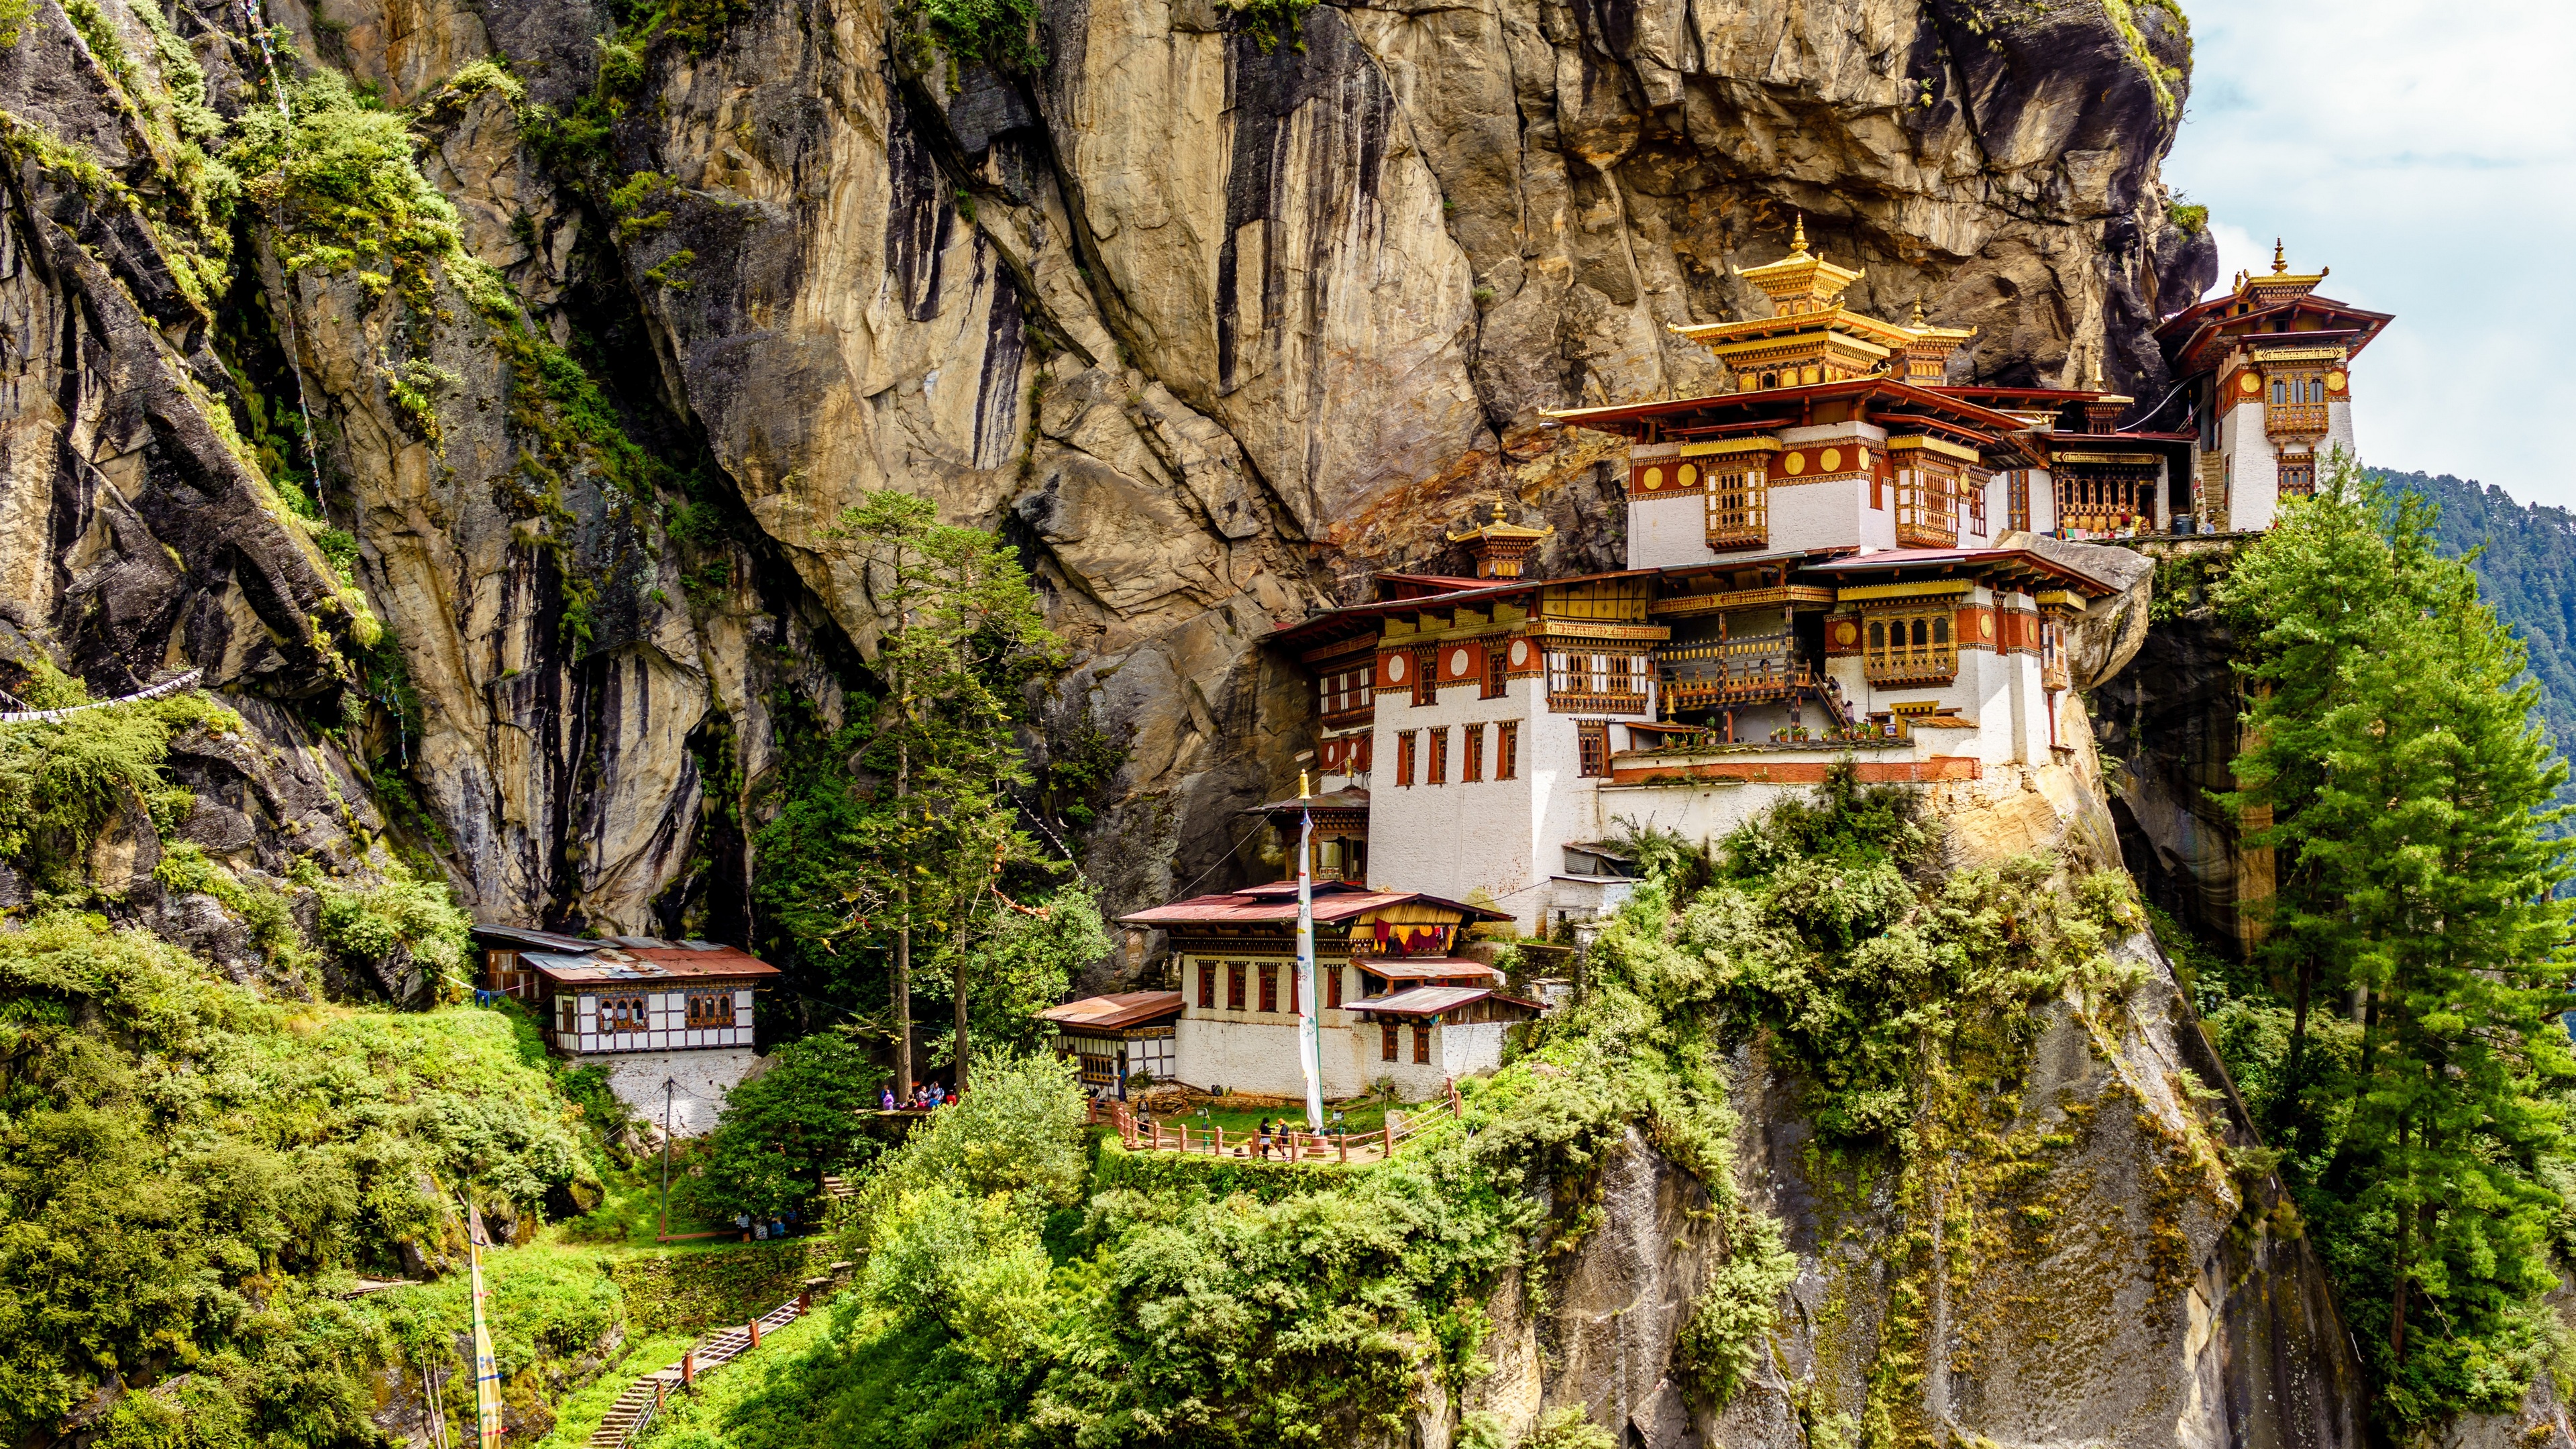 General 3840x2160 Bhutan nature rock Taktsang Monastery trees temple cliff house Buddhism mountains Asia outdoors rocks building